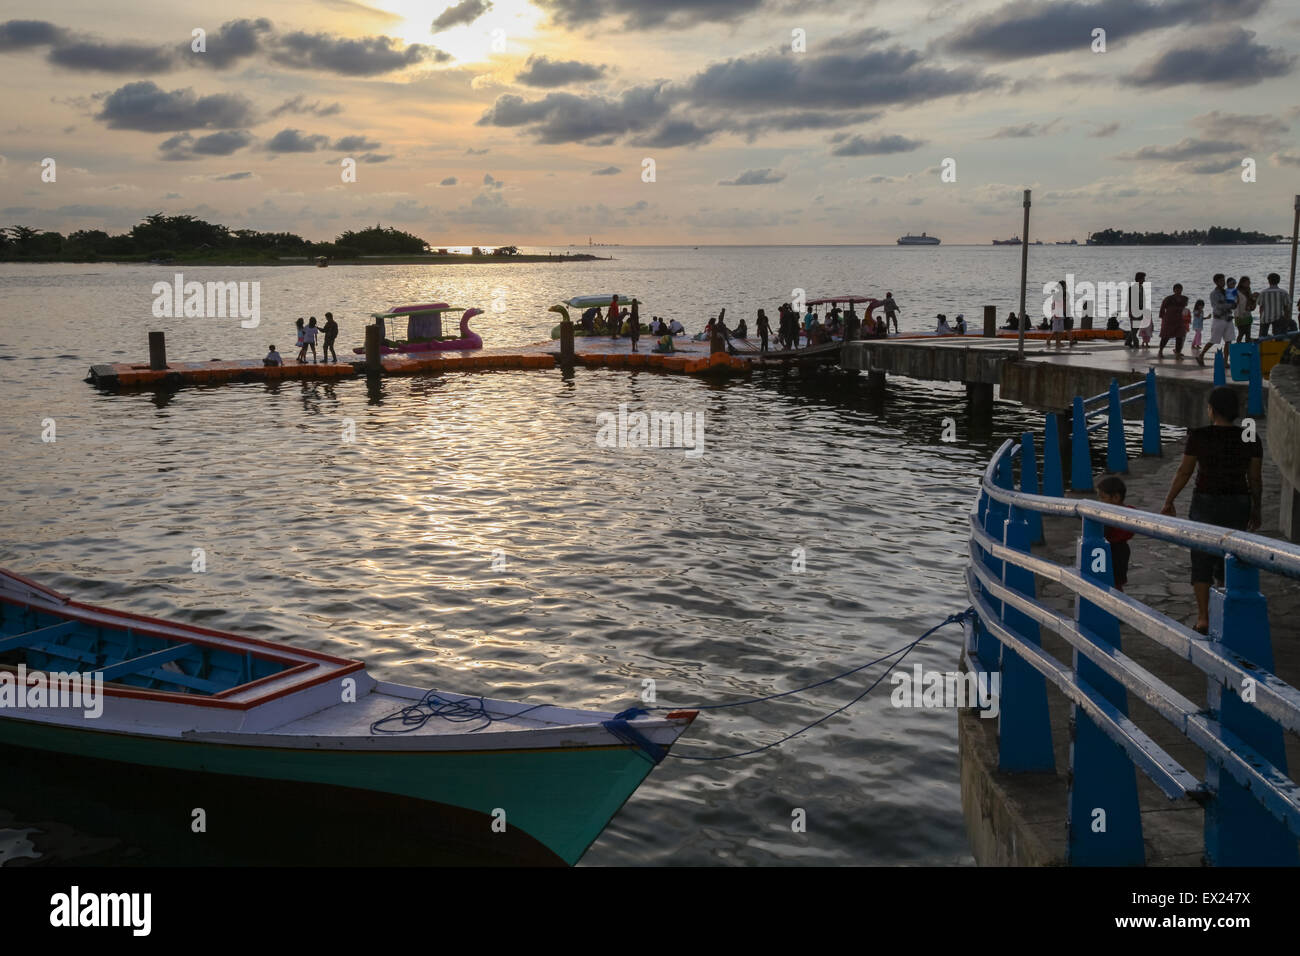 A jetty at Losari, a favourite beach for citizens to spend their afternoon leisure time in the coastal city of Makassar, South Sulawesi, Indonesia. Stock Photo